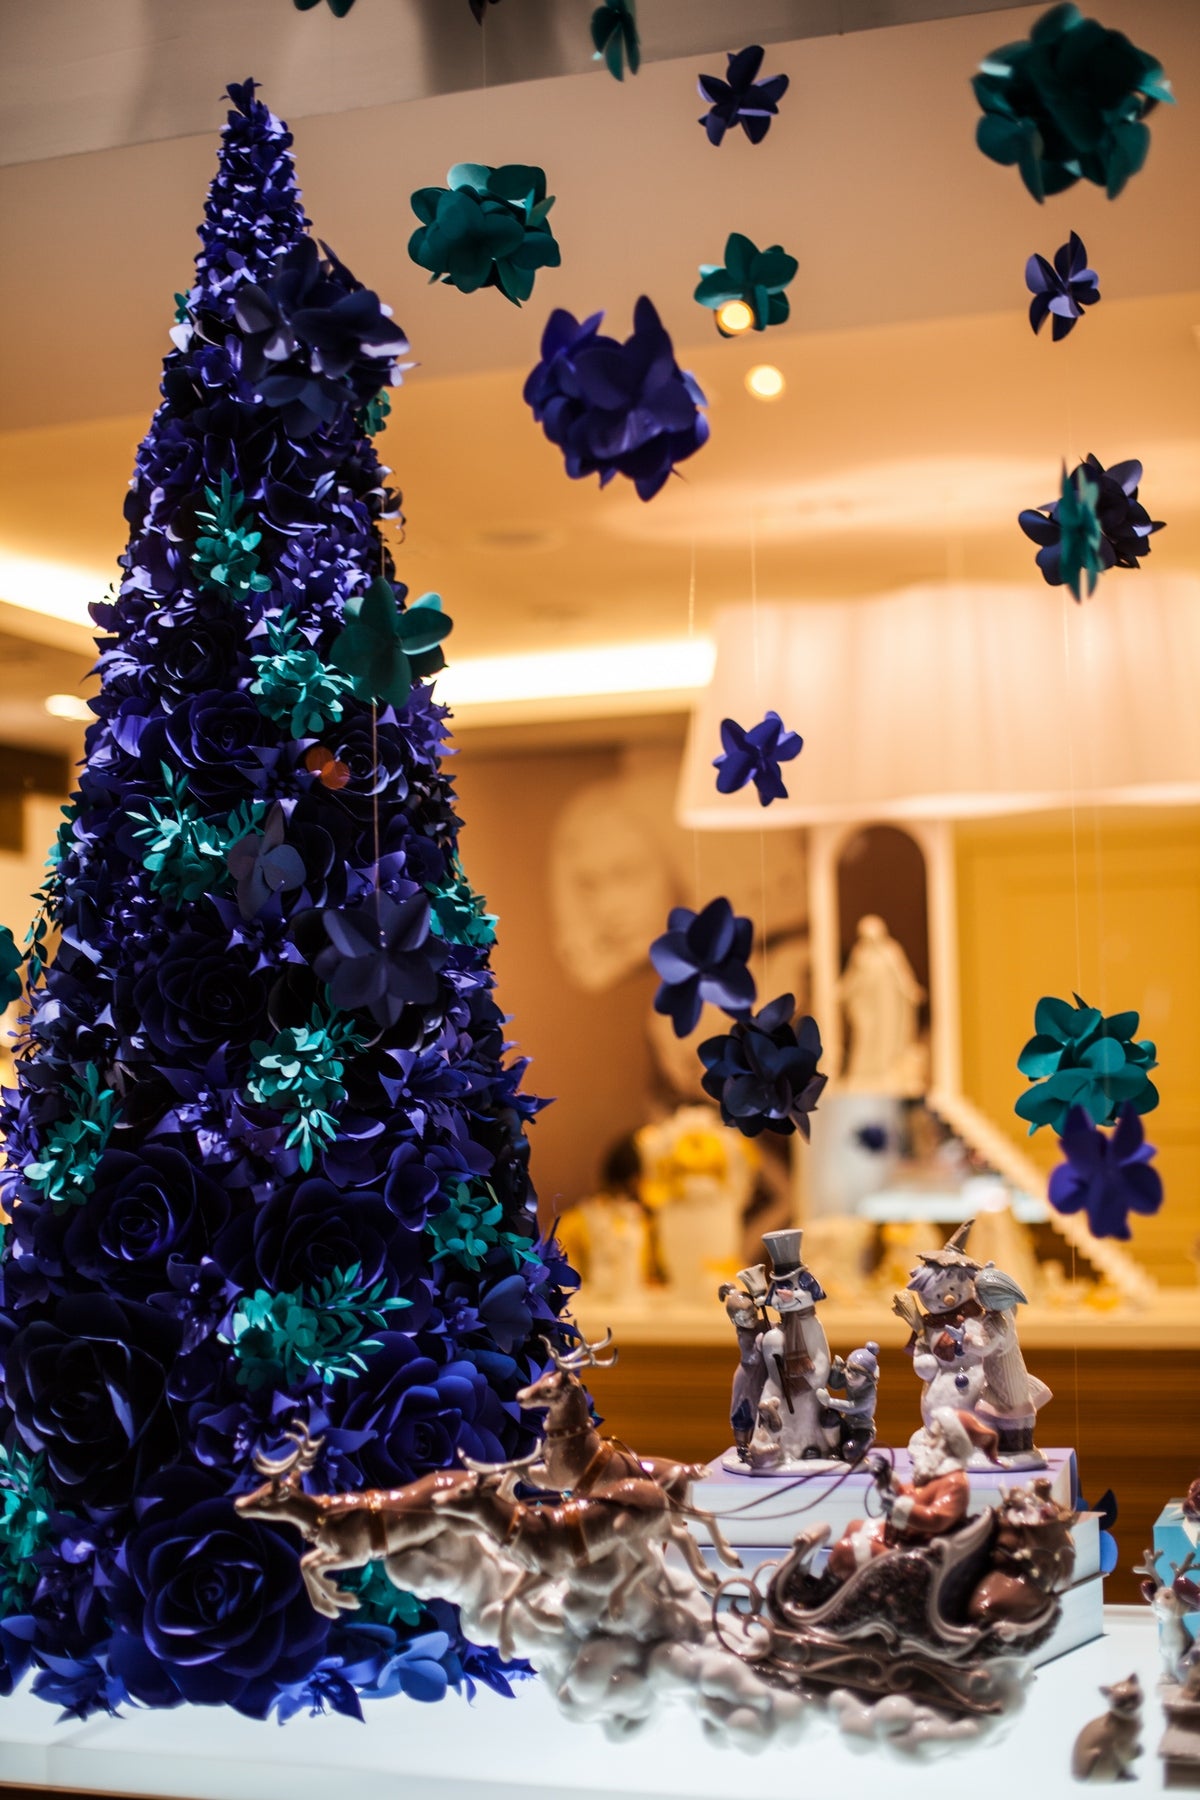 Vibrant paper flower art installation capturing the spirit of the holidays with a Christmas tree adorned in ultramarine blue and turquoise blue paper flowers and delicate hanging paper hydrangeas.